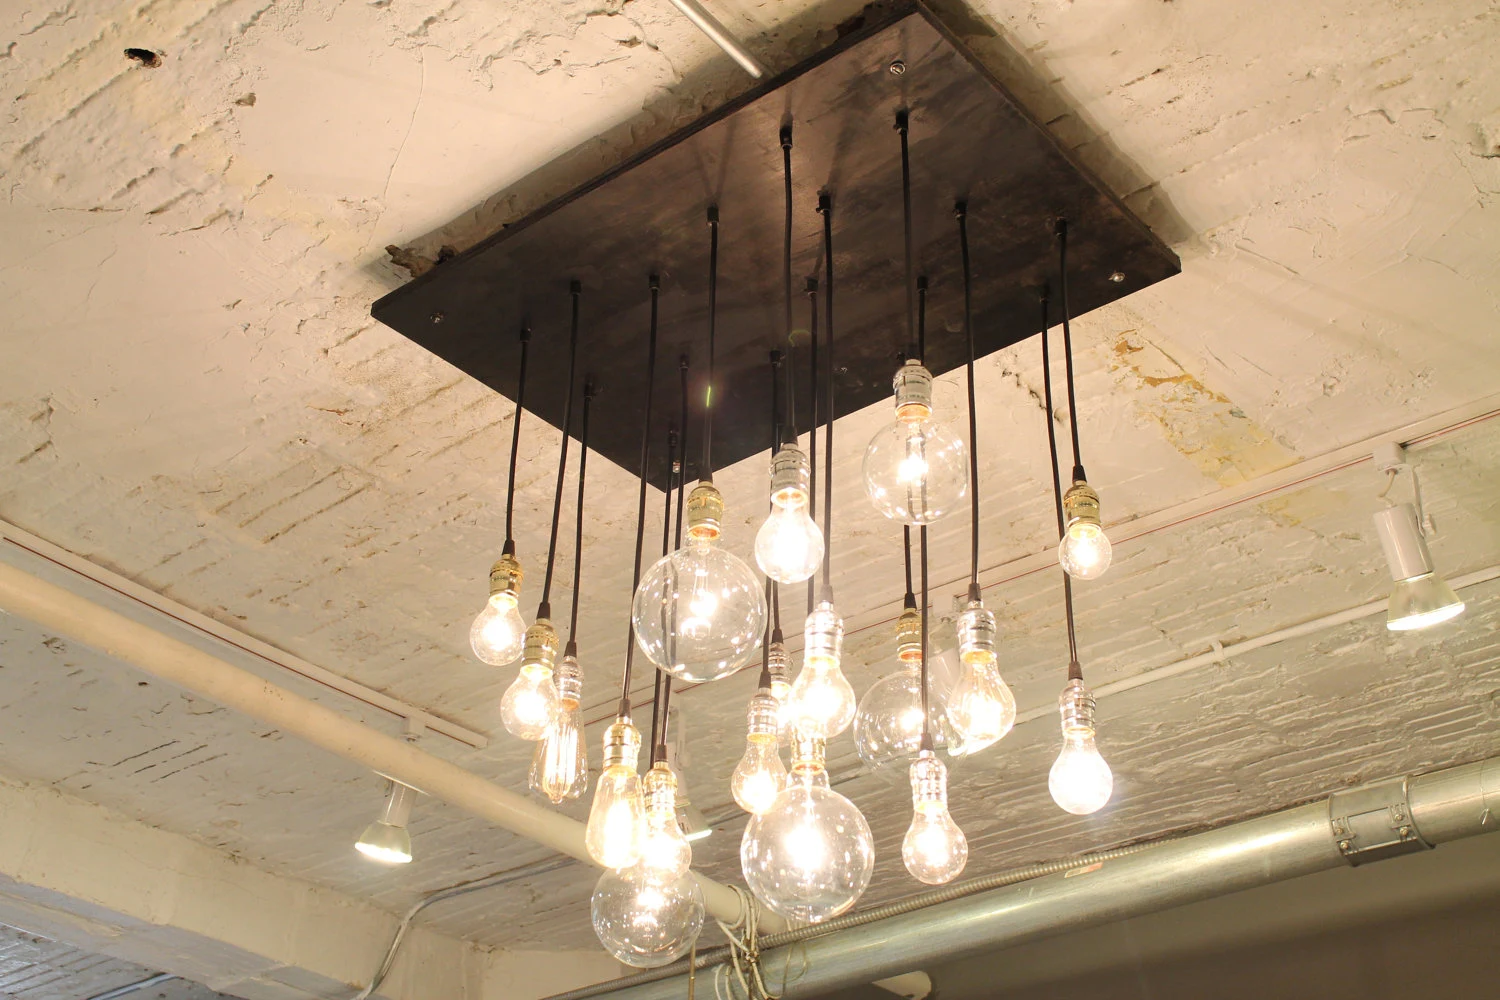 20 Unconventional Handmade Industrial Lighting Designs You Can DIY 11